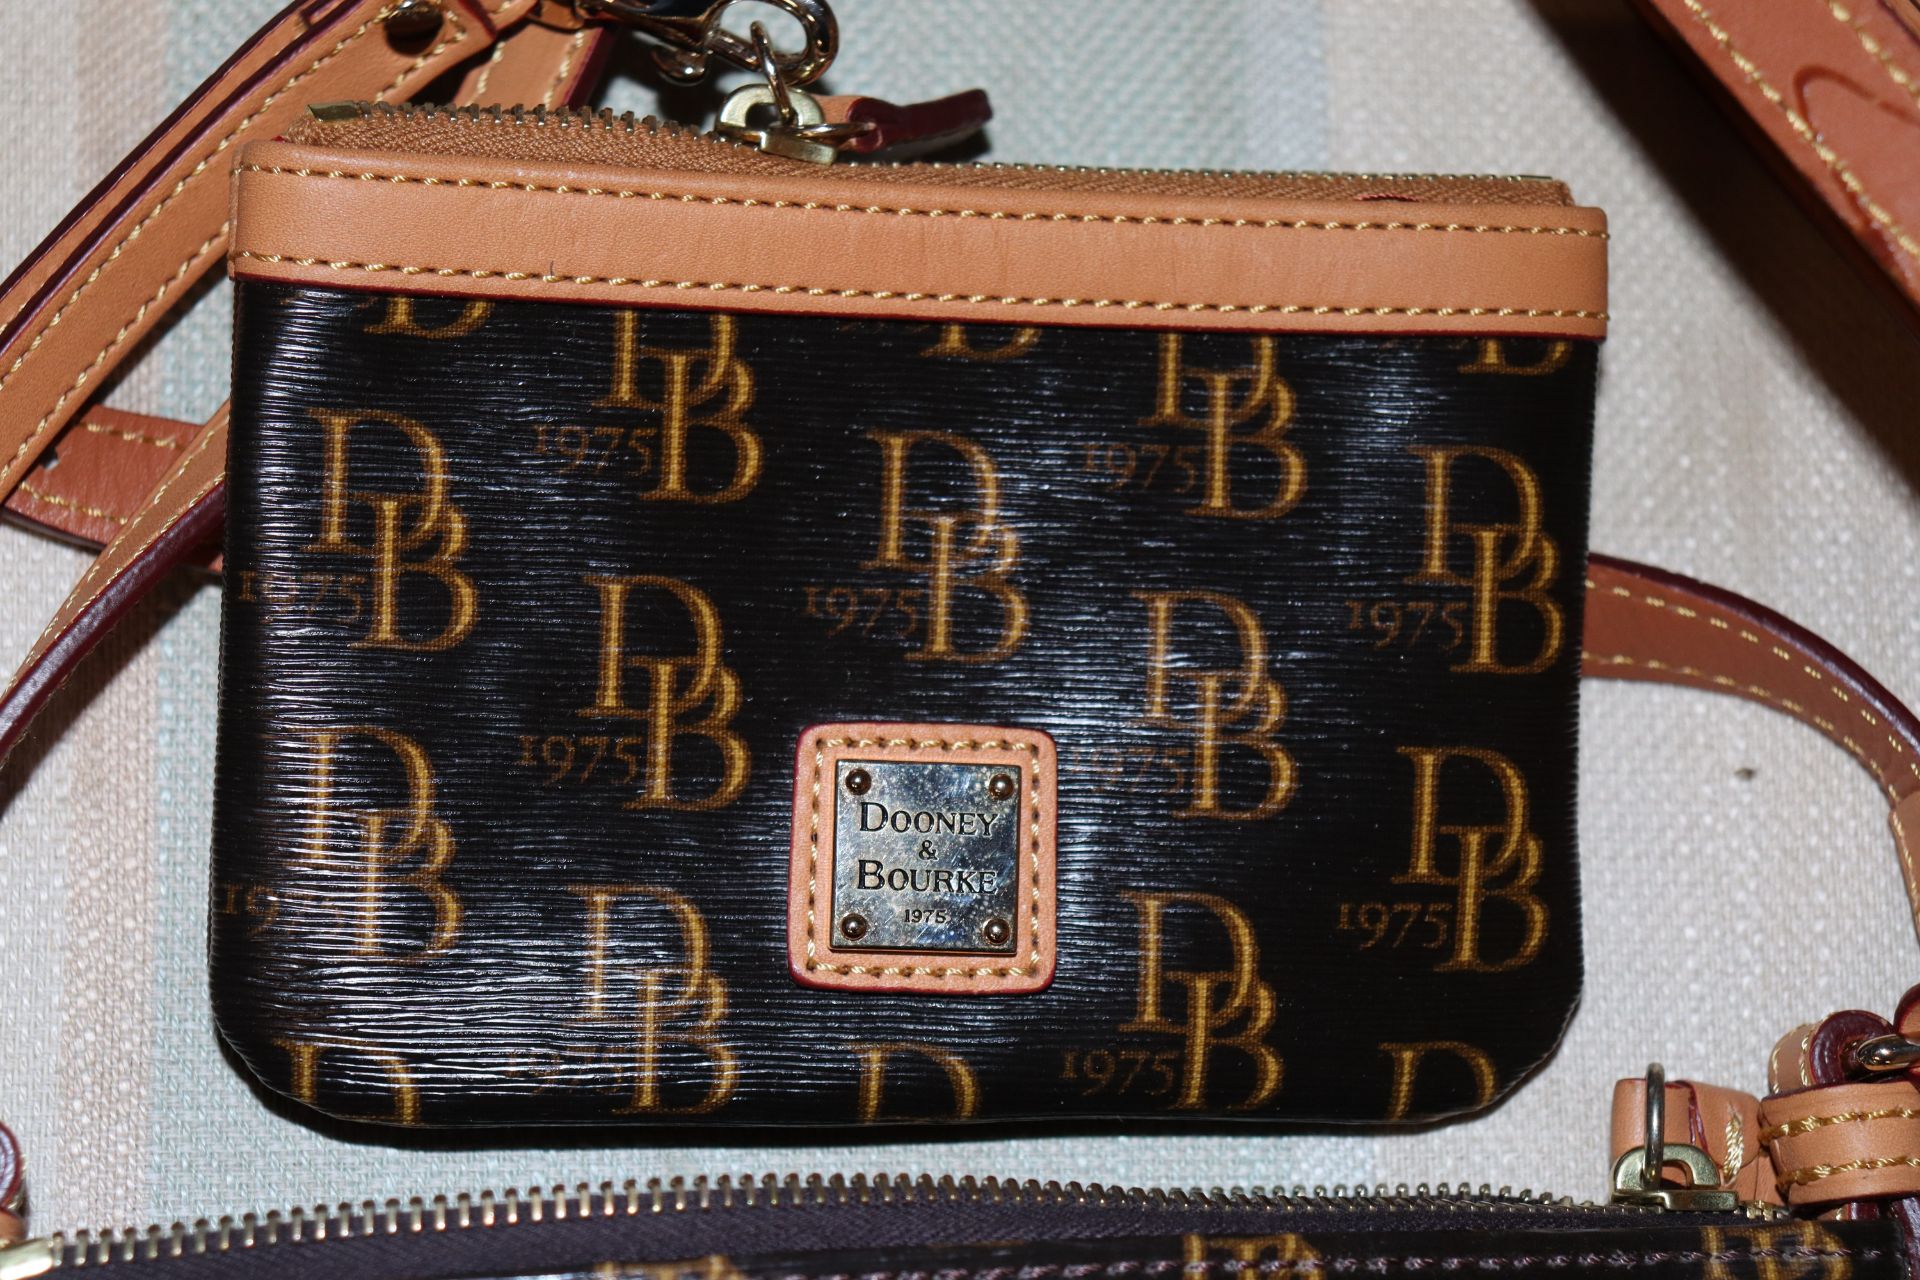 A Dooney & Bourke cross body bag and purse - Image 3 of 3